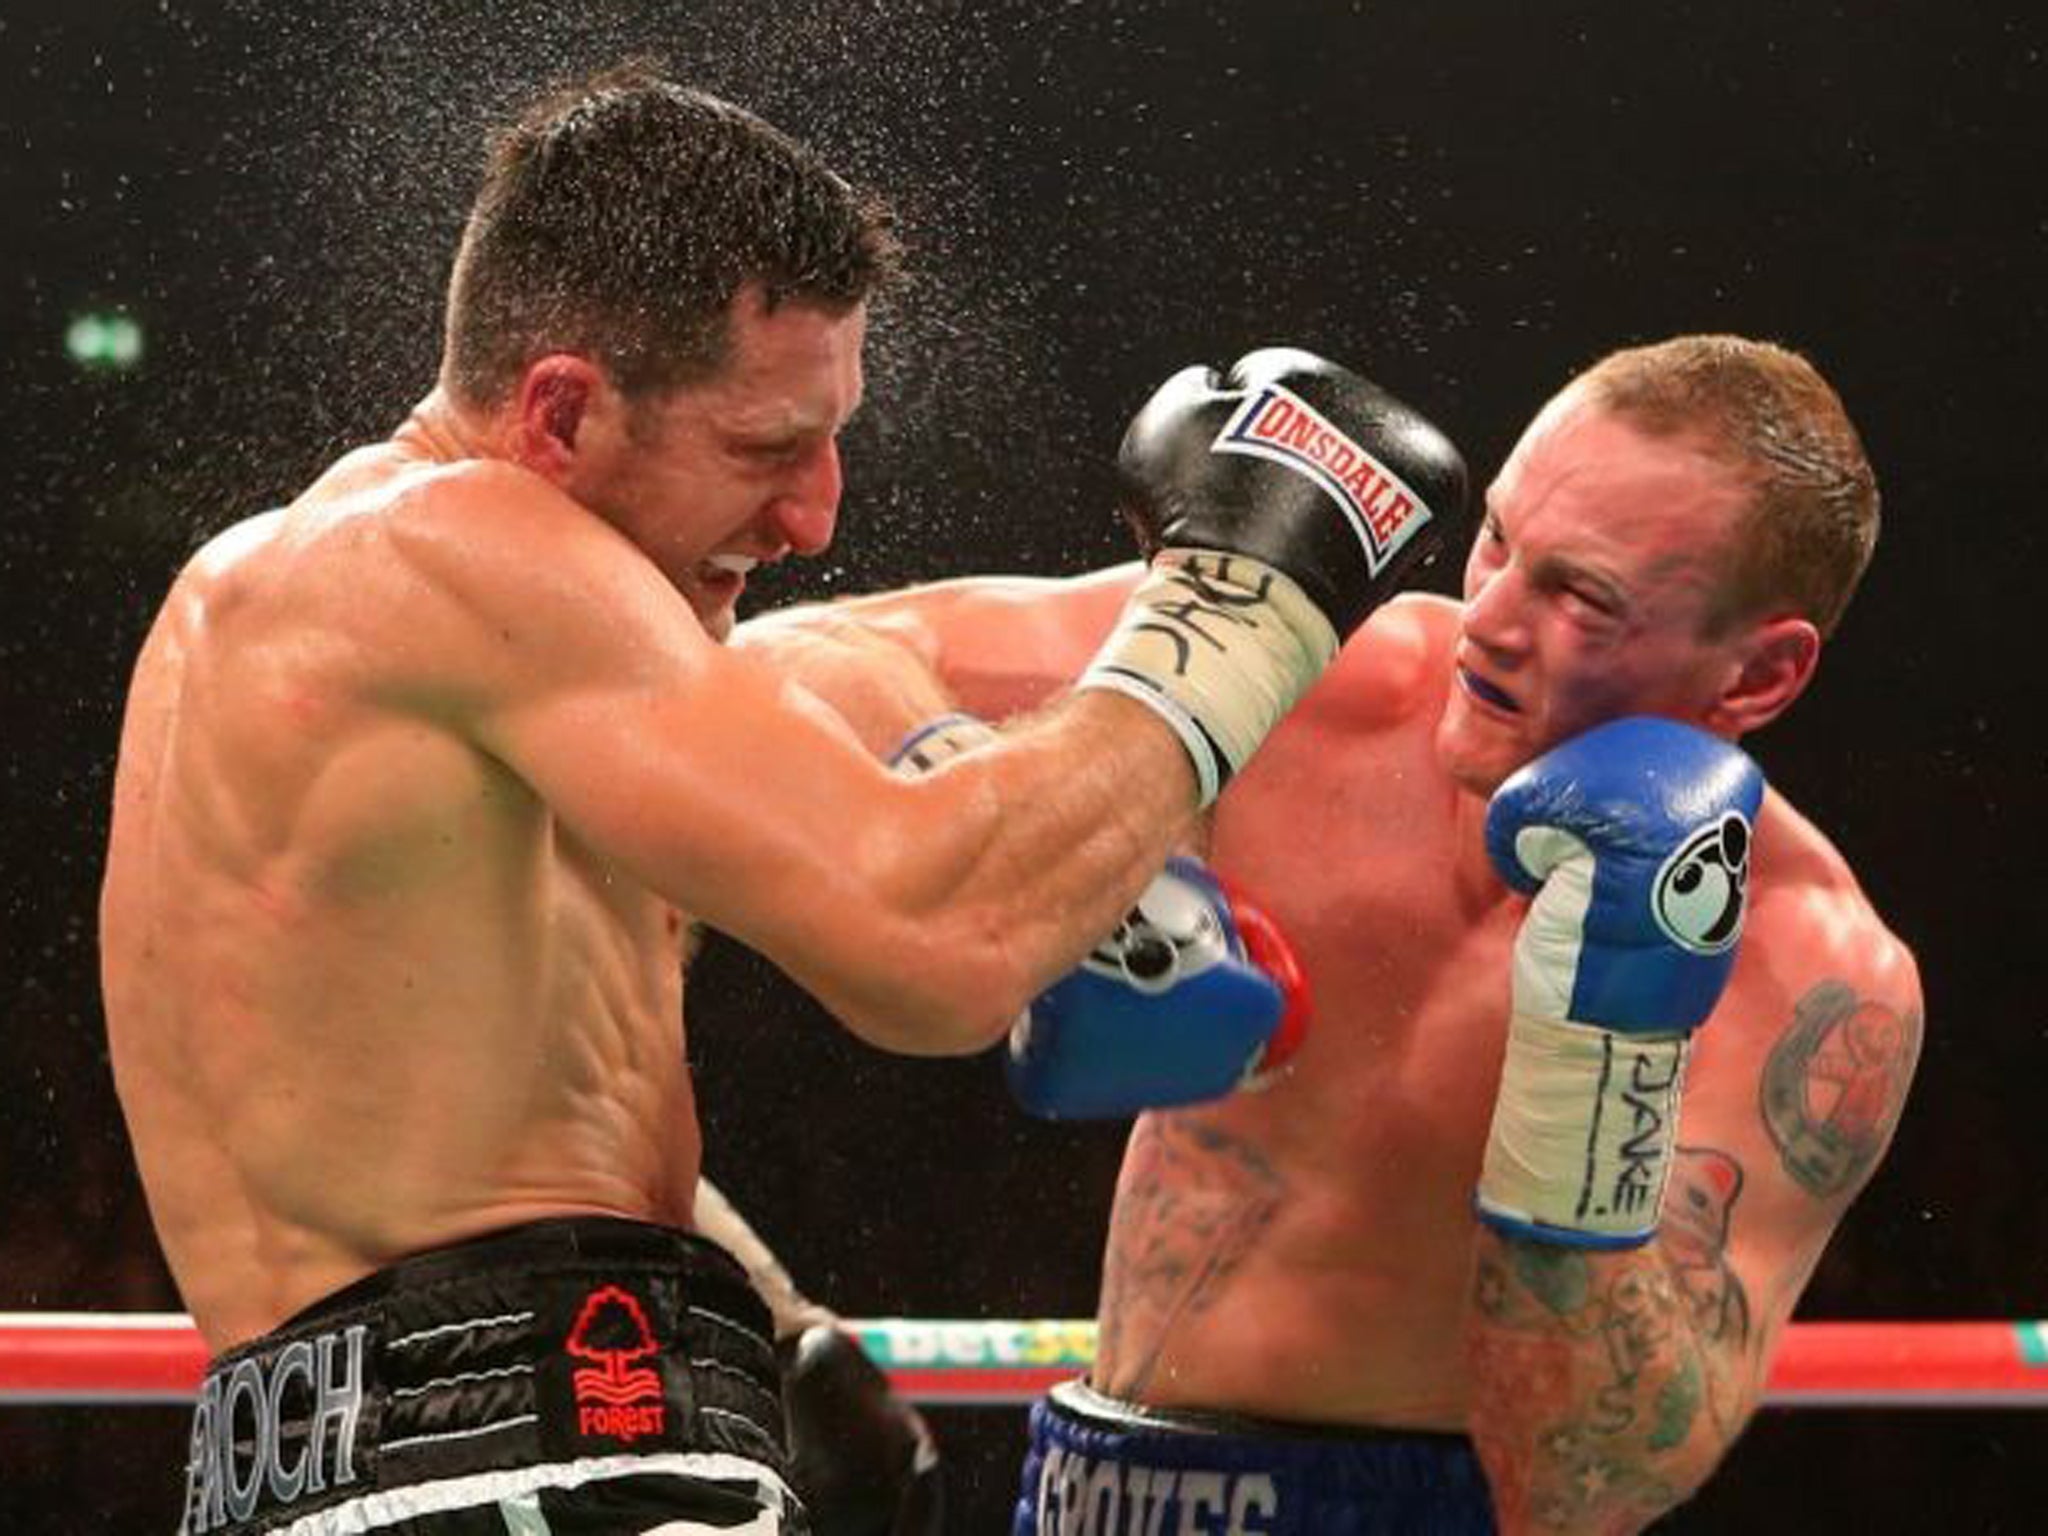 Froch may have mocked Groves' credentials for sharing the same ring during the acrimonious big-fight build-up and appeared to believe he was due an easy and enjoyable night - but it proved anything but